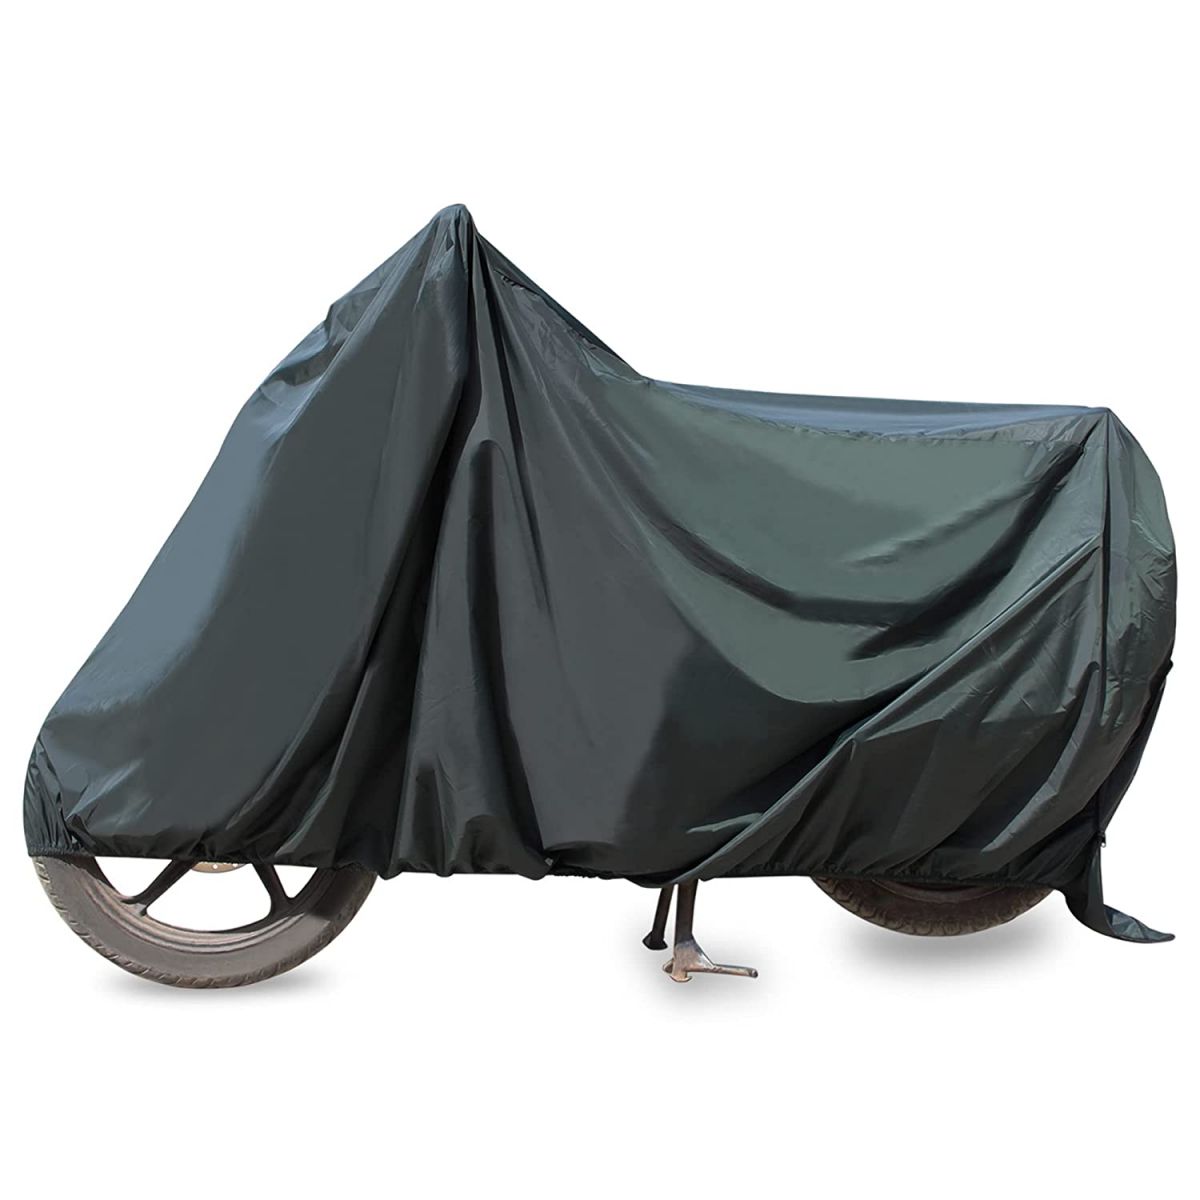 Best Bike Cover Available for Sale in India